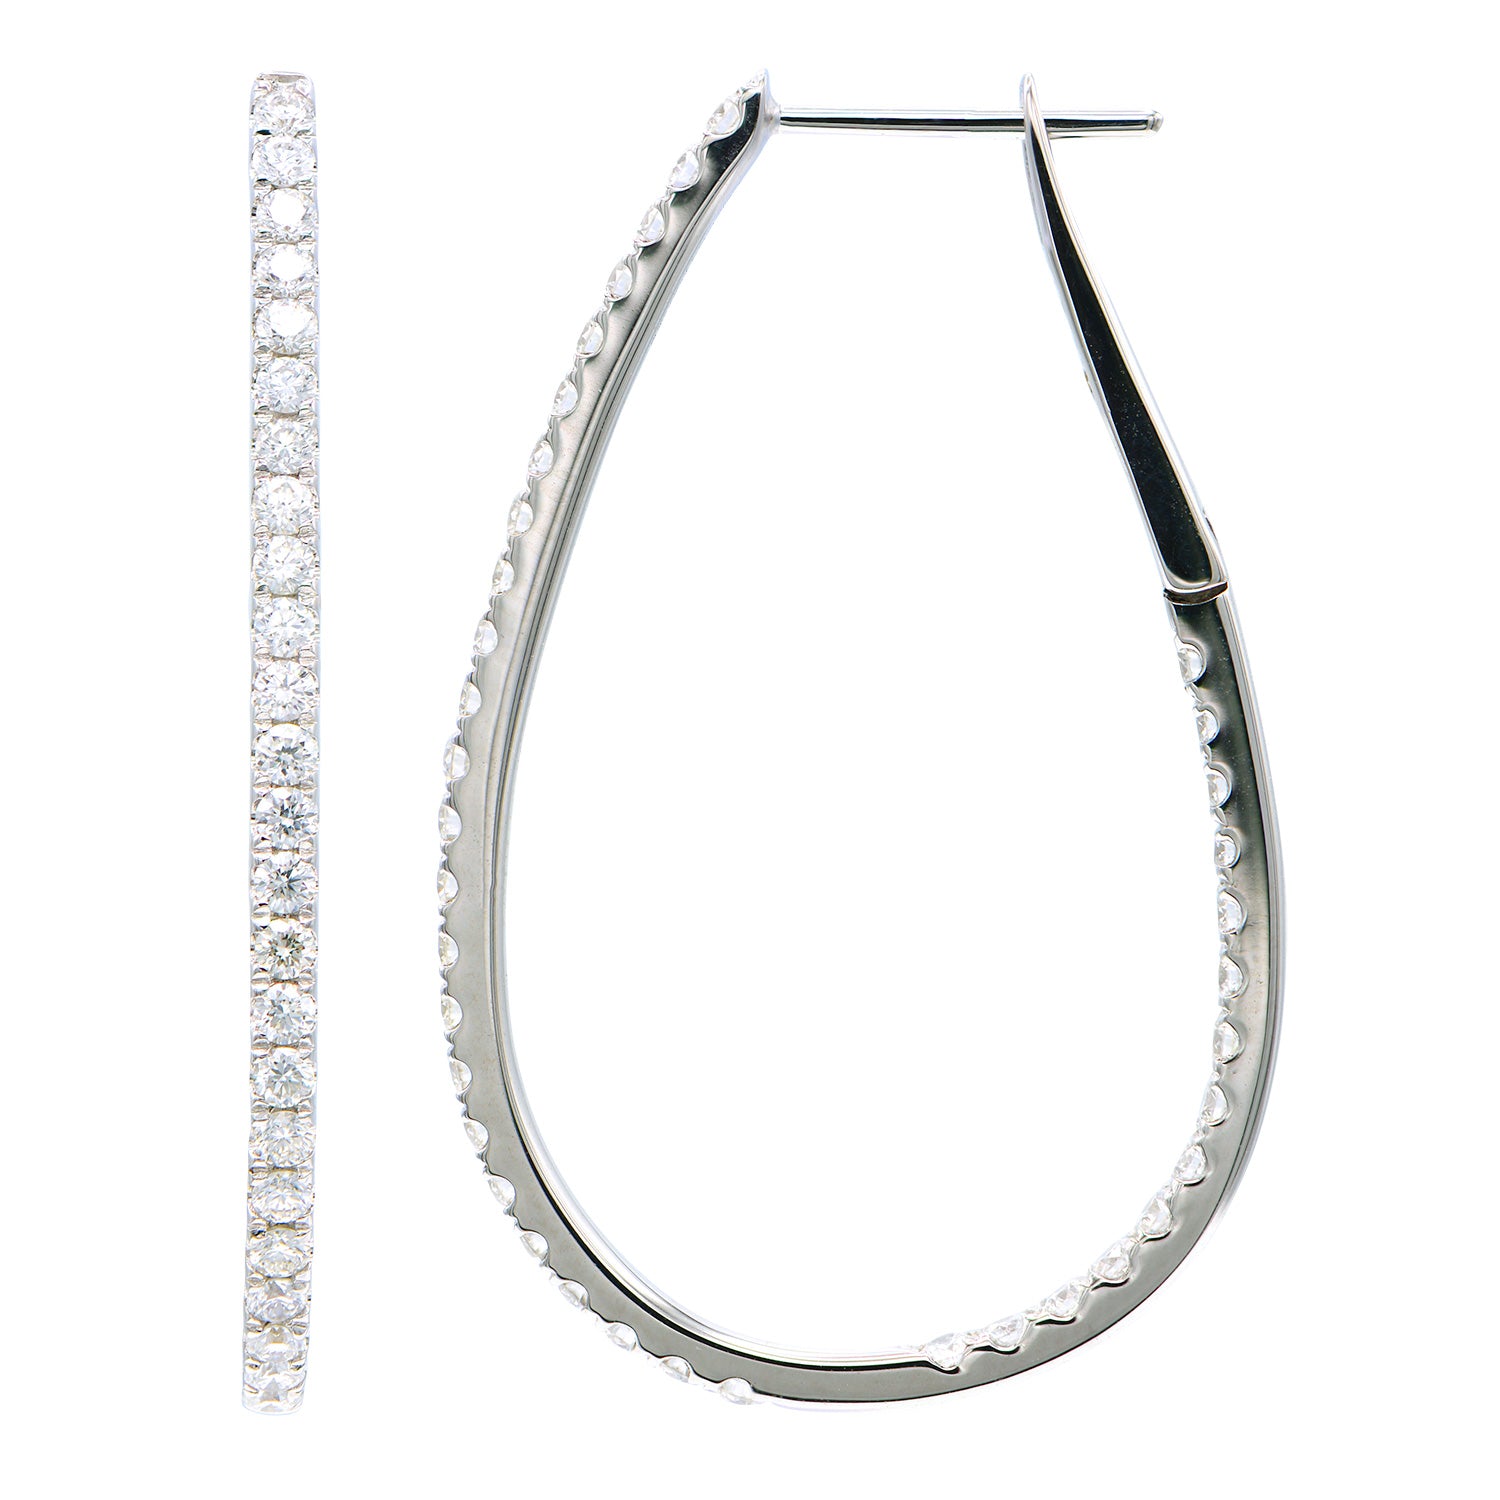 14K White Gold Inside and Out Hoop Earrings - Large